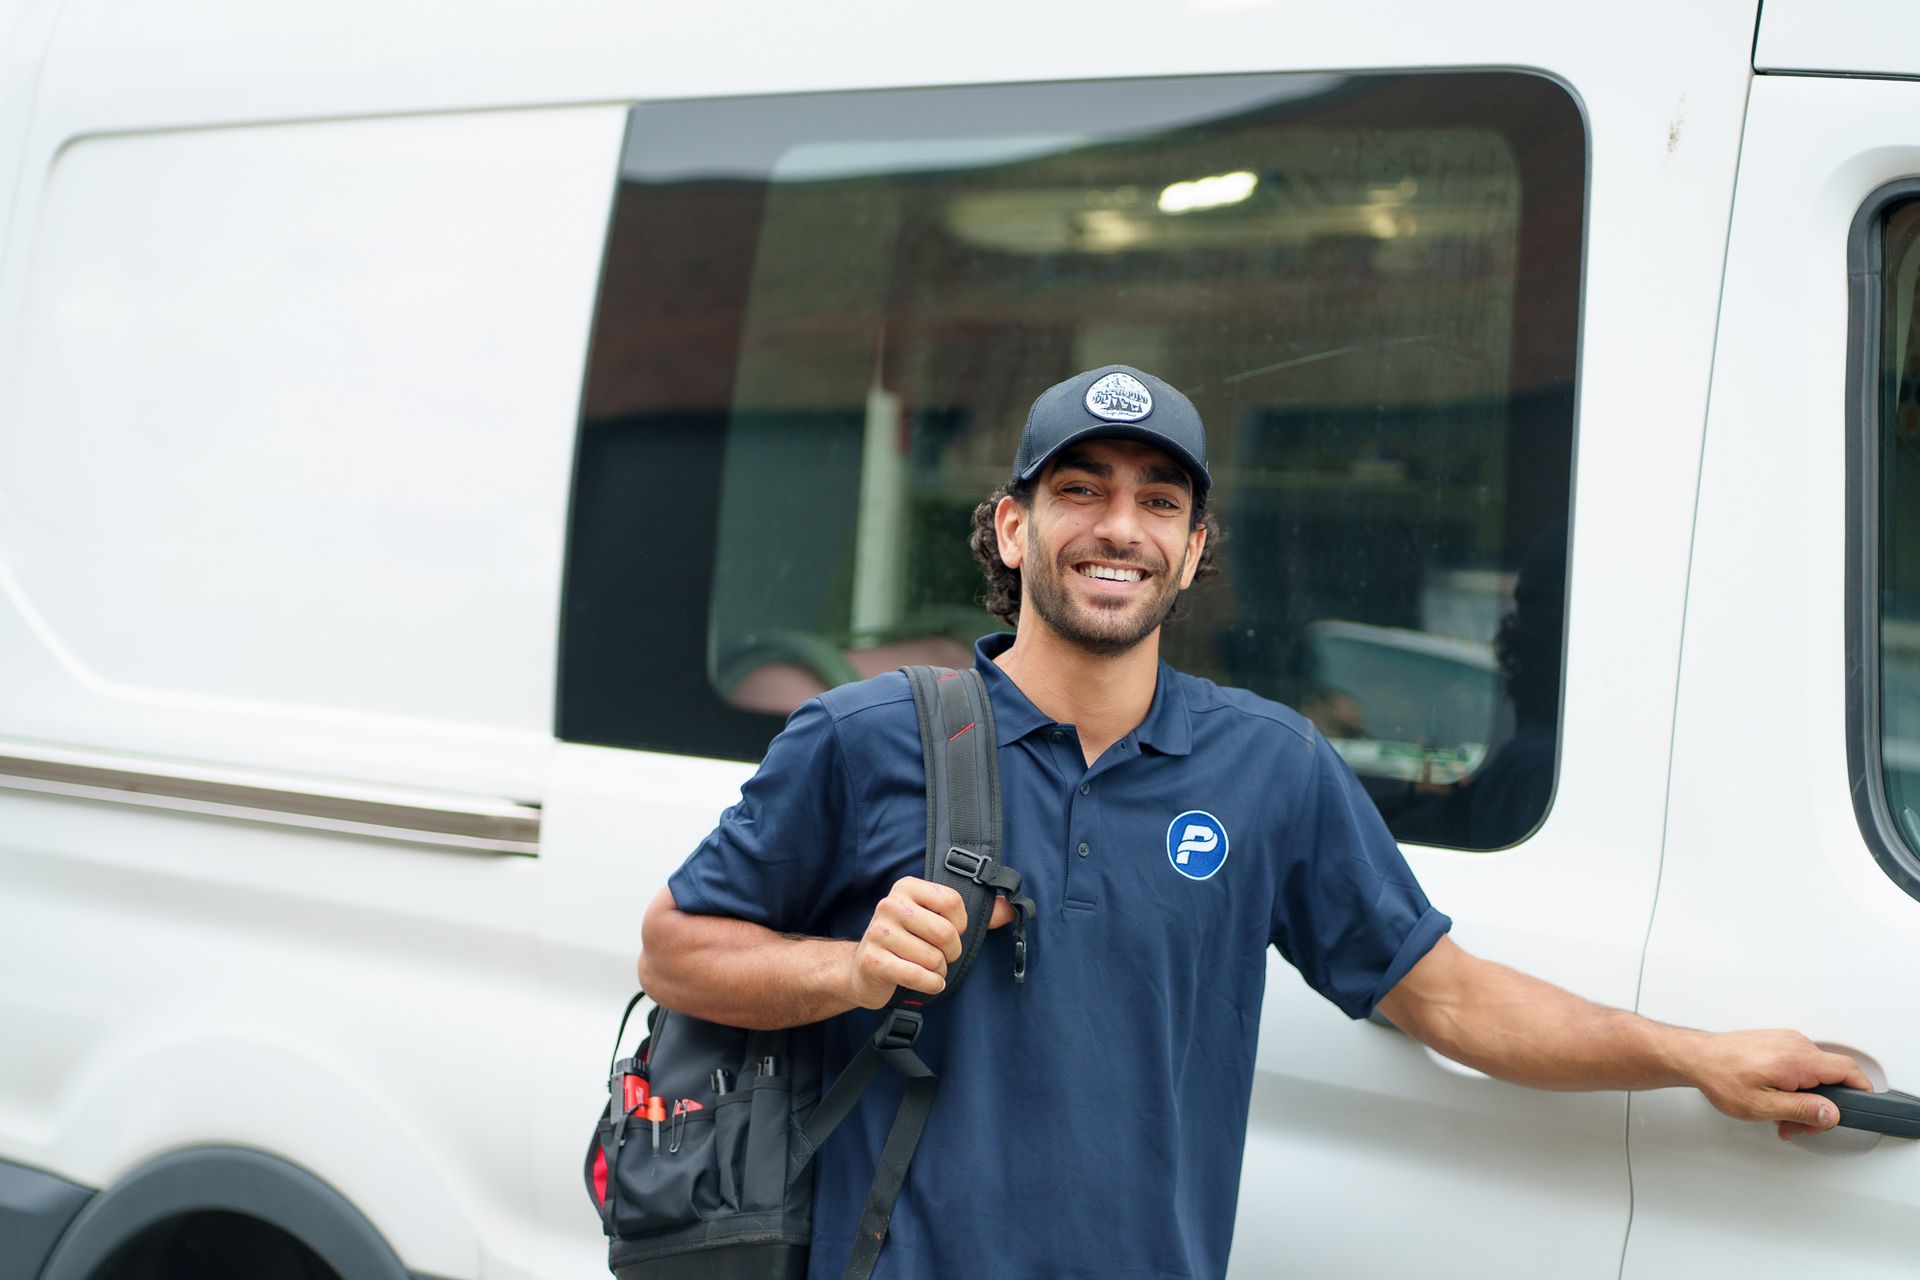 Prevett Heating and Cooling |A man in a blue shirt is standing next to a white van.